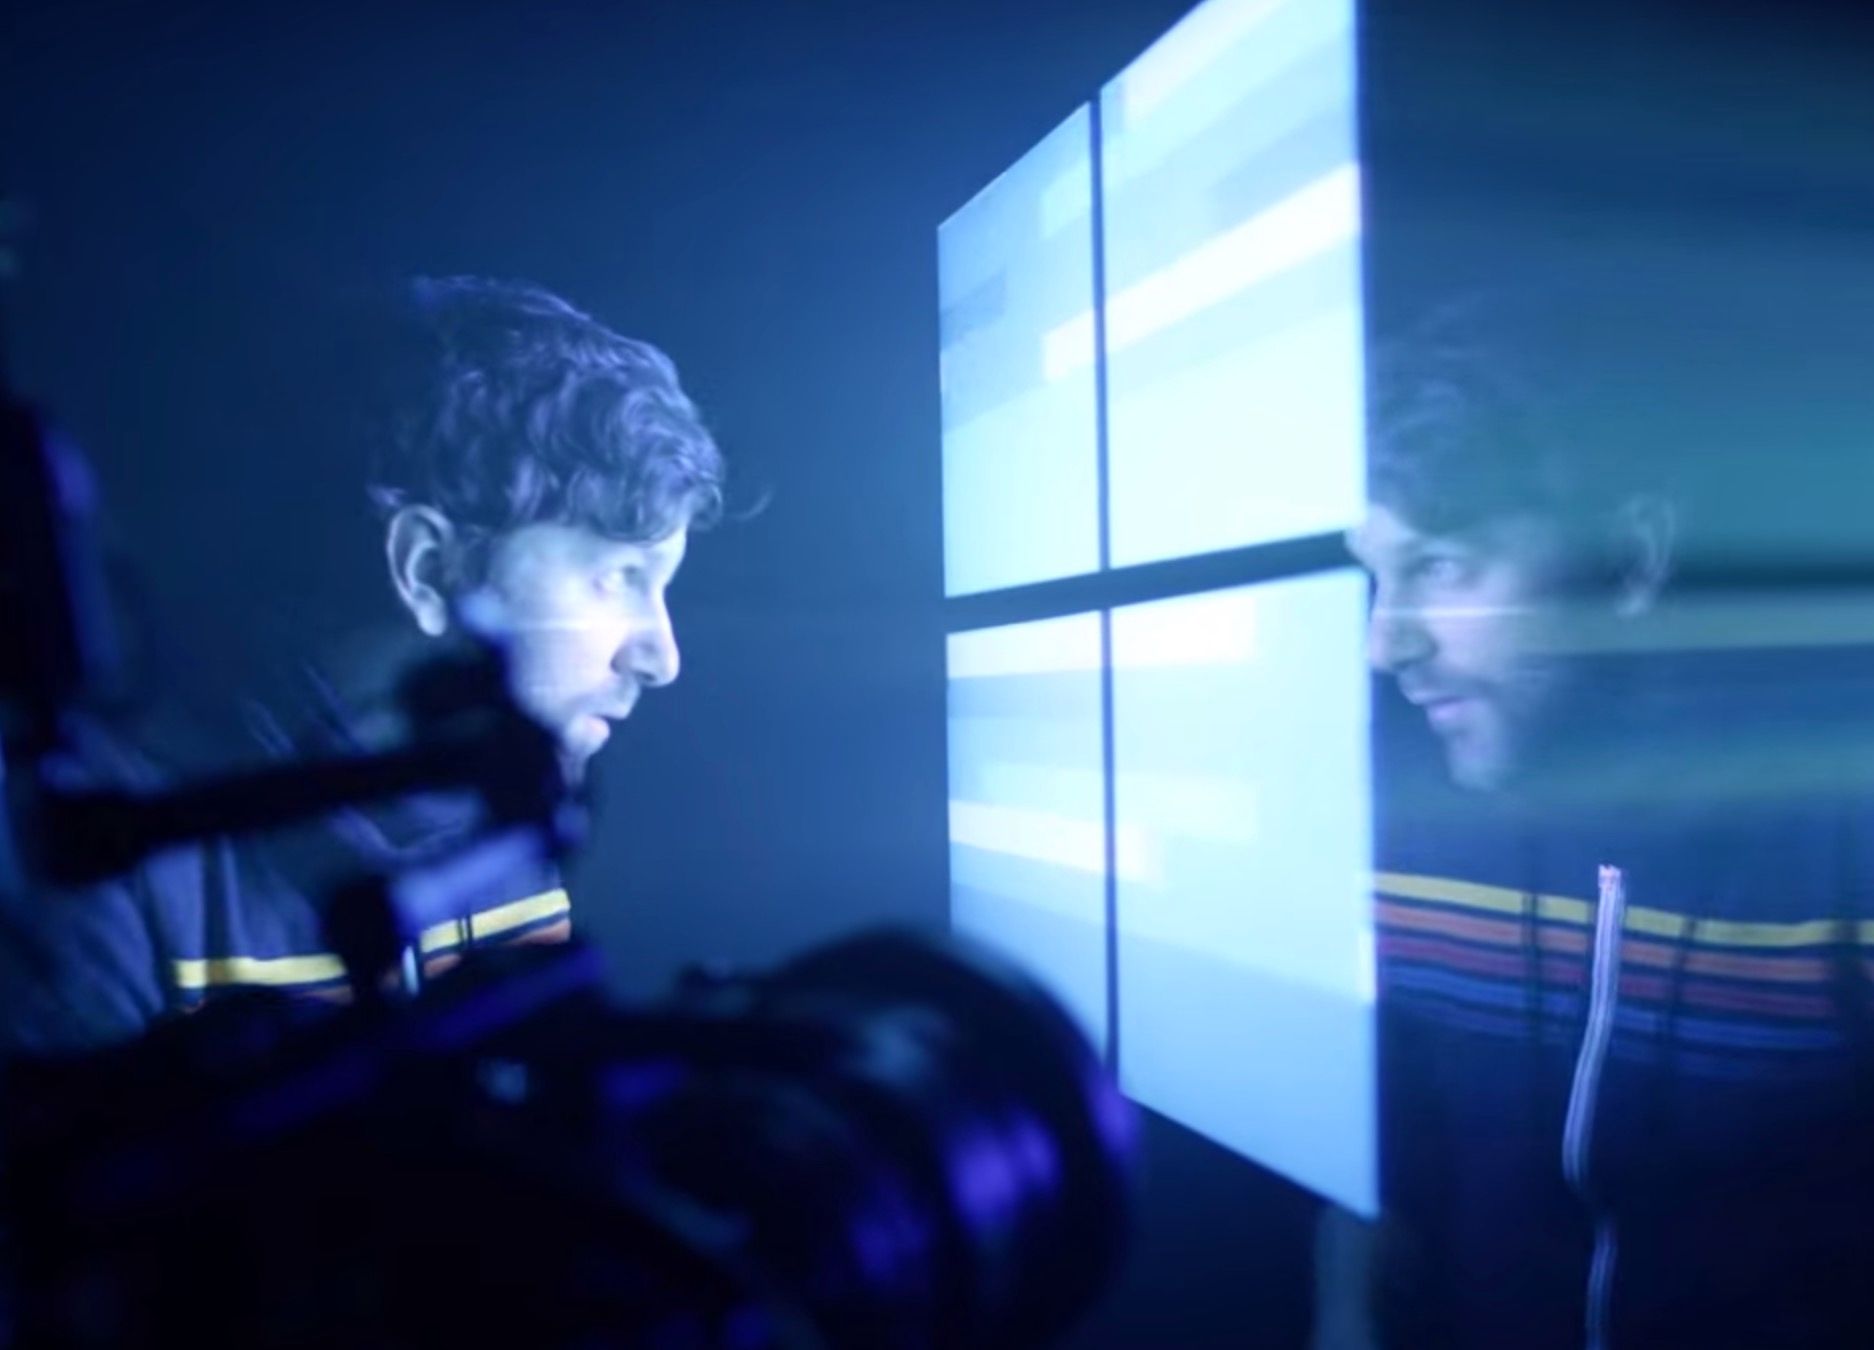 watch microsoft create the windows 10 wallpaper using projectors and lasers image 1